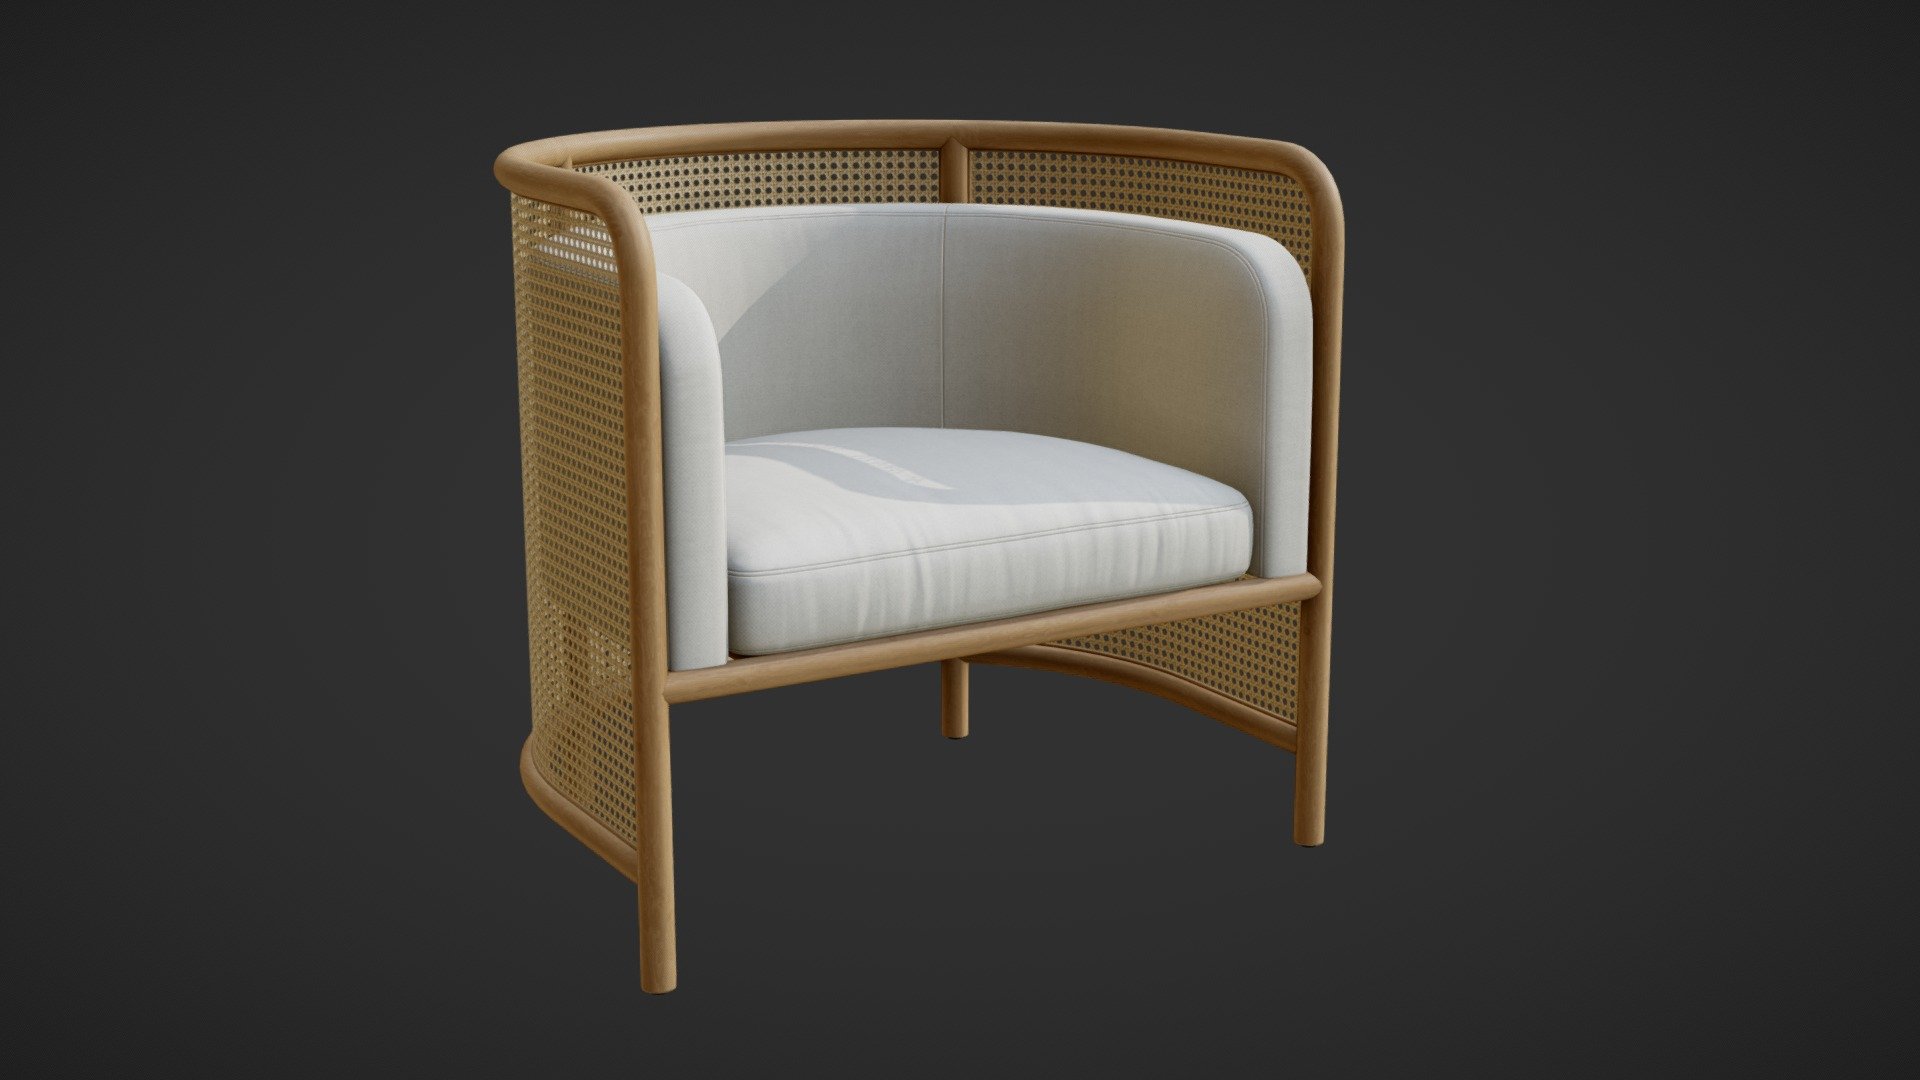 PBR version of a High-quality 3d model of a Crate and Barrel Fields Cane Back White Accent Chair by Leanne Ford.

10194 polygons
10466 vertices - Crate&Barrel Fields Cane Armchair - Buy Royalty Free 3D model by 3detto 3d model